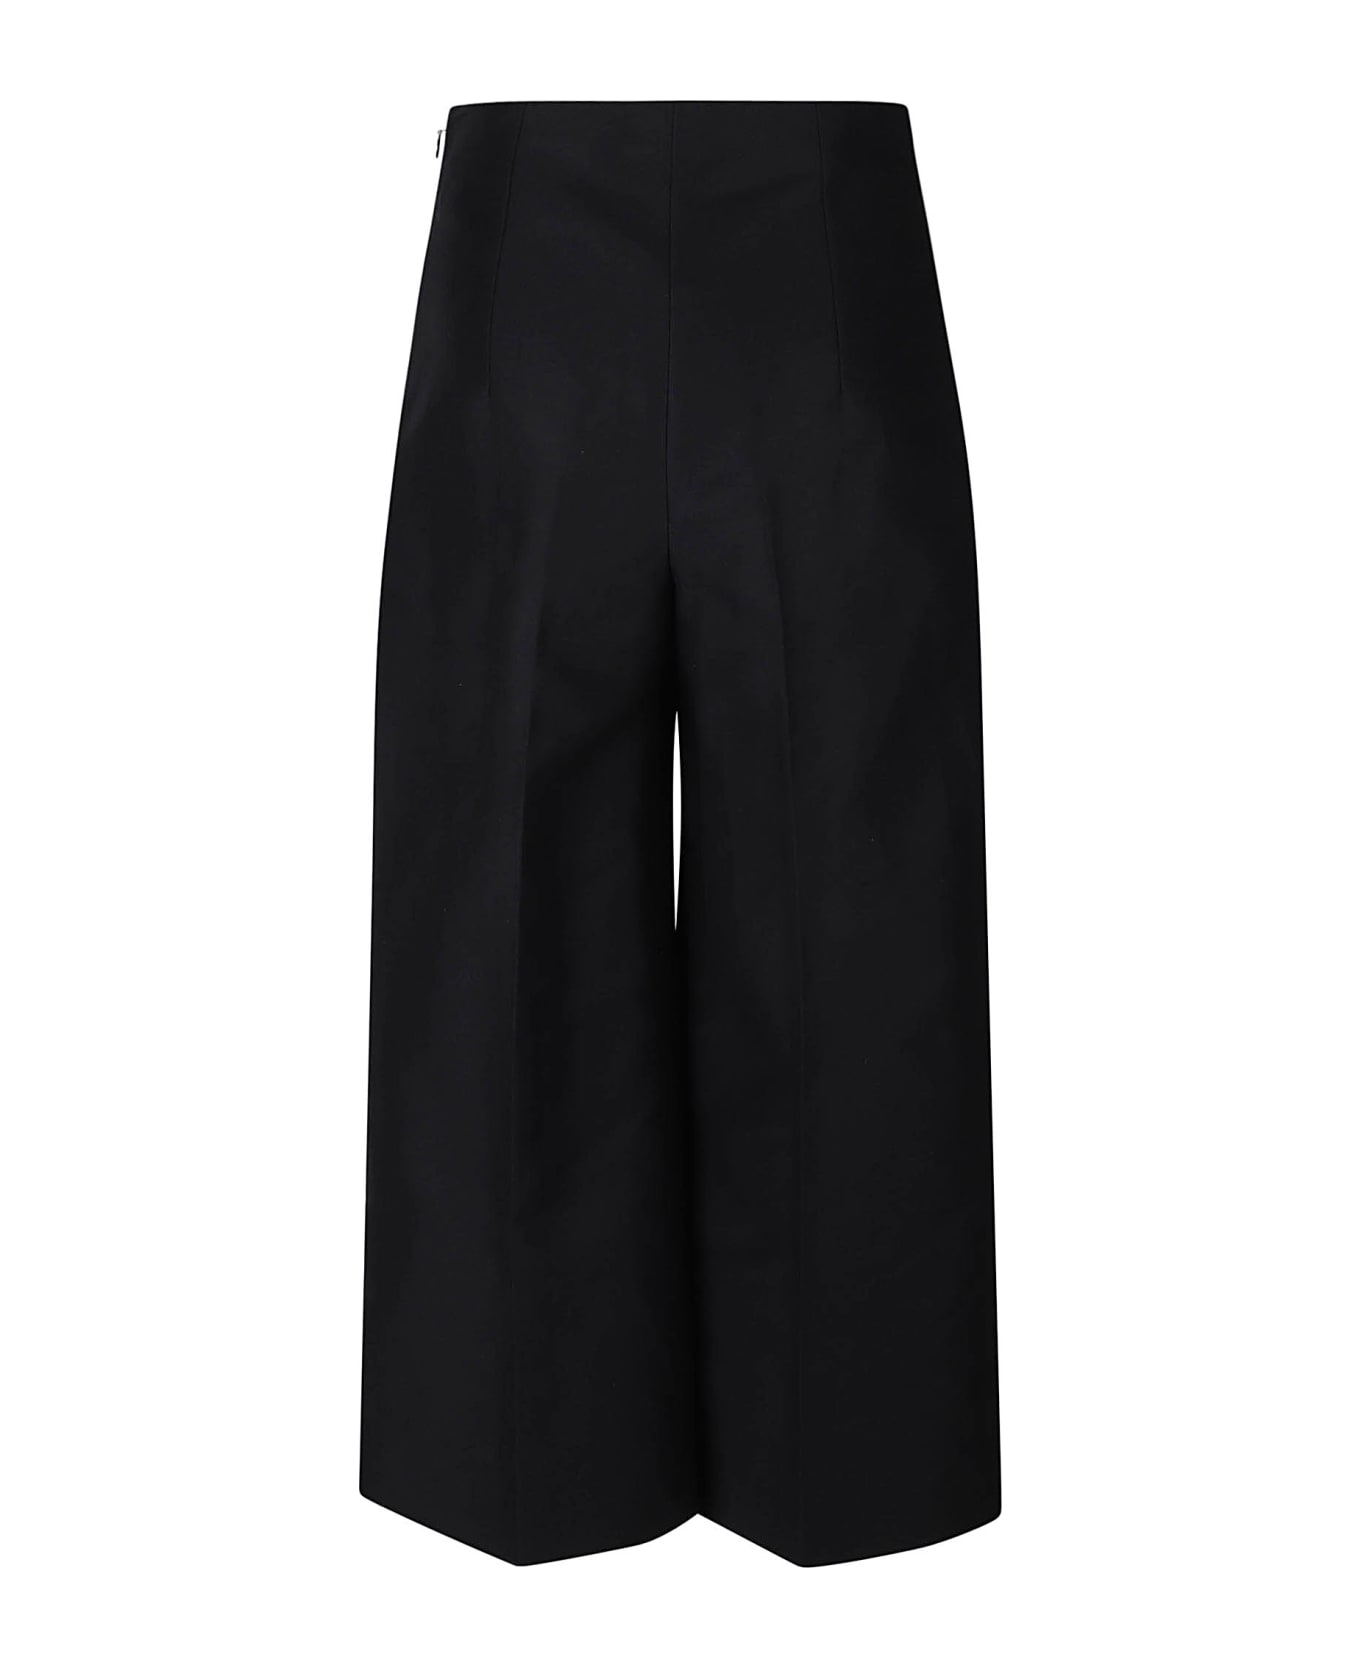 Marni Pressed Crease Cropped Trousers - Black ボトムス